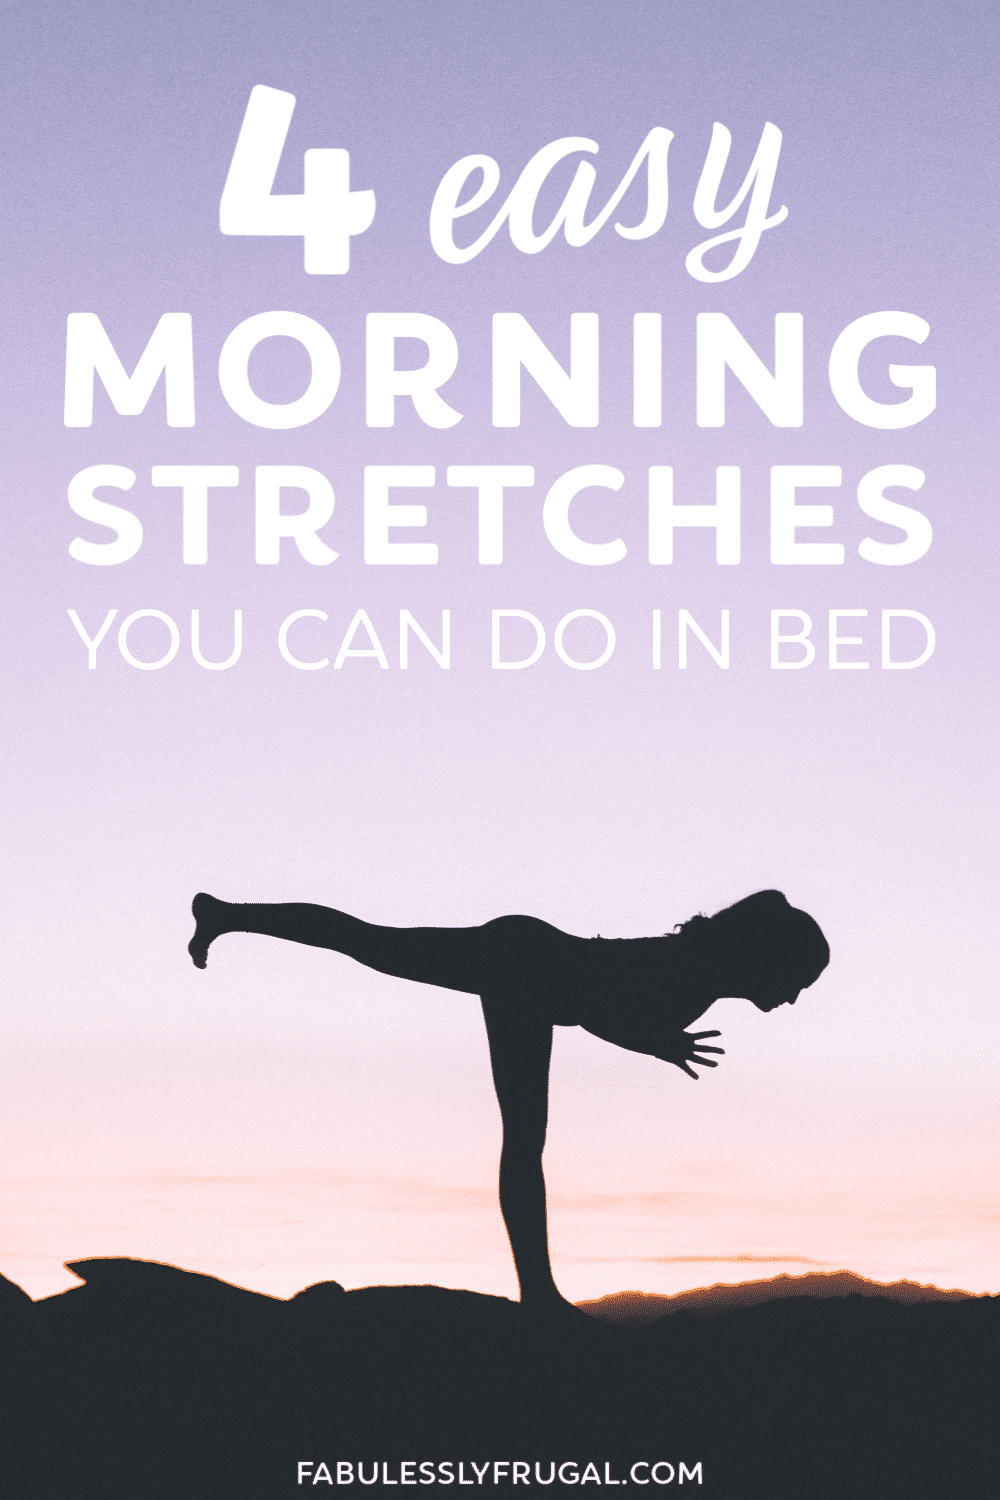 Morning stretches in bed